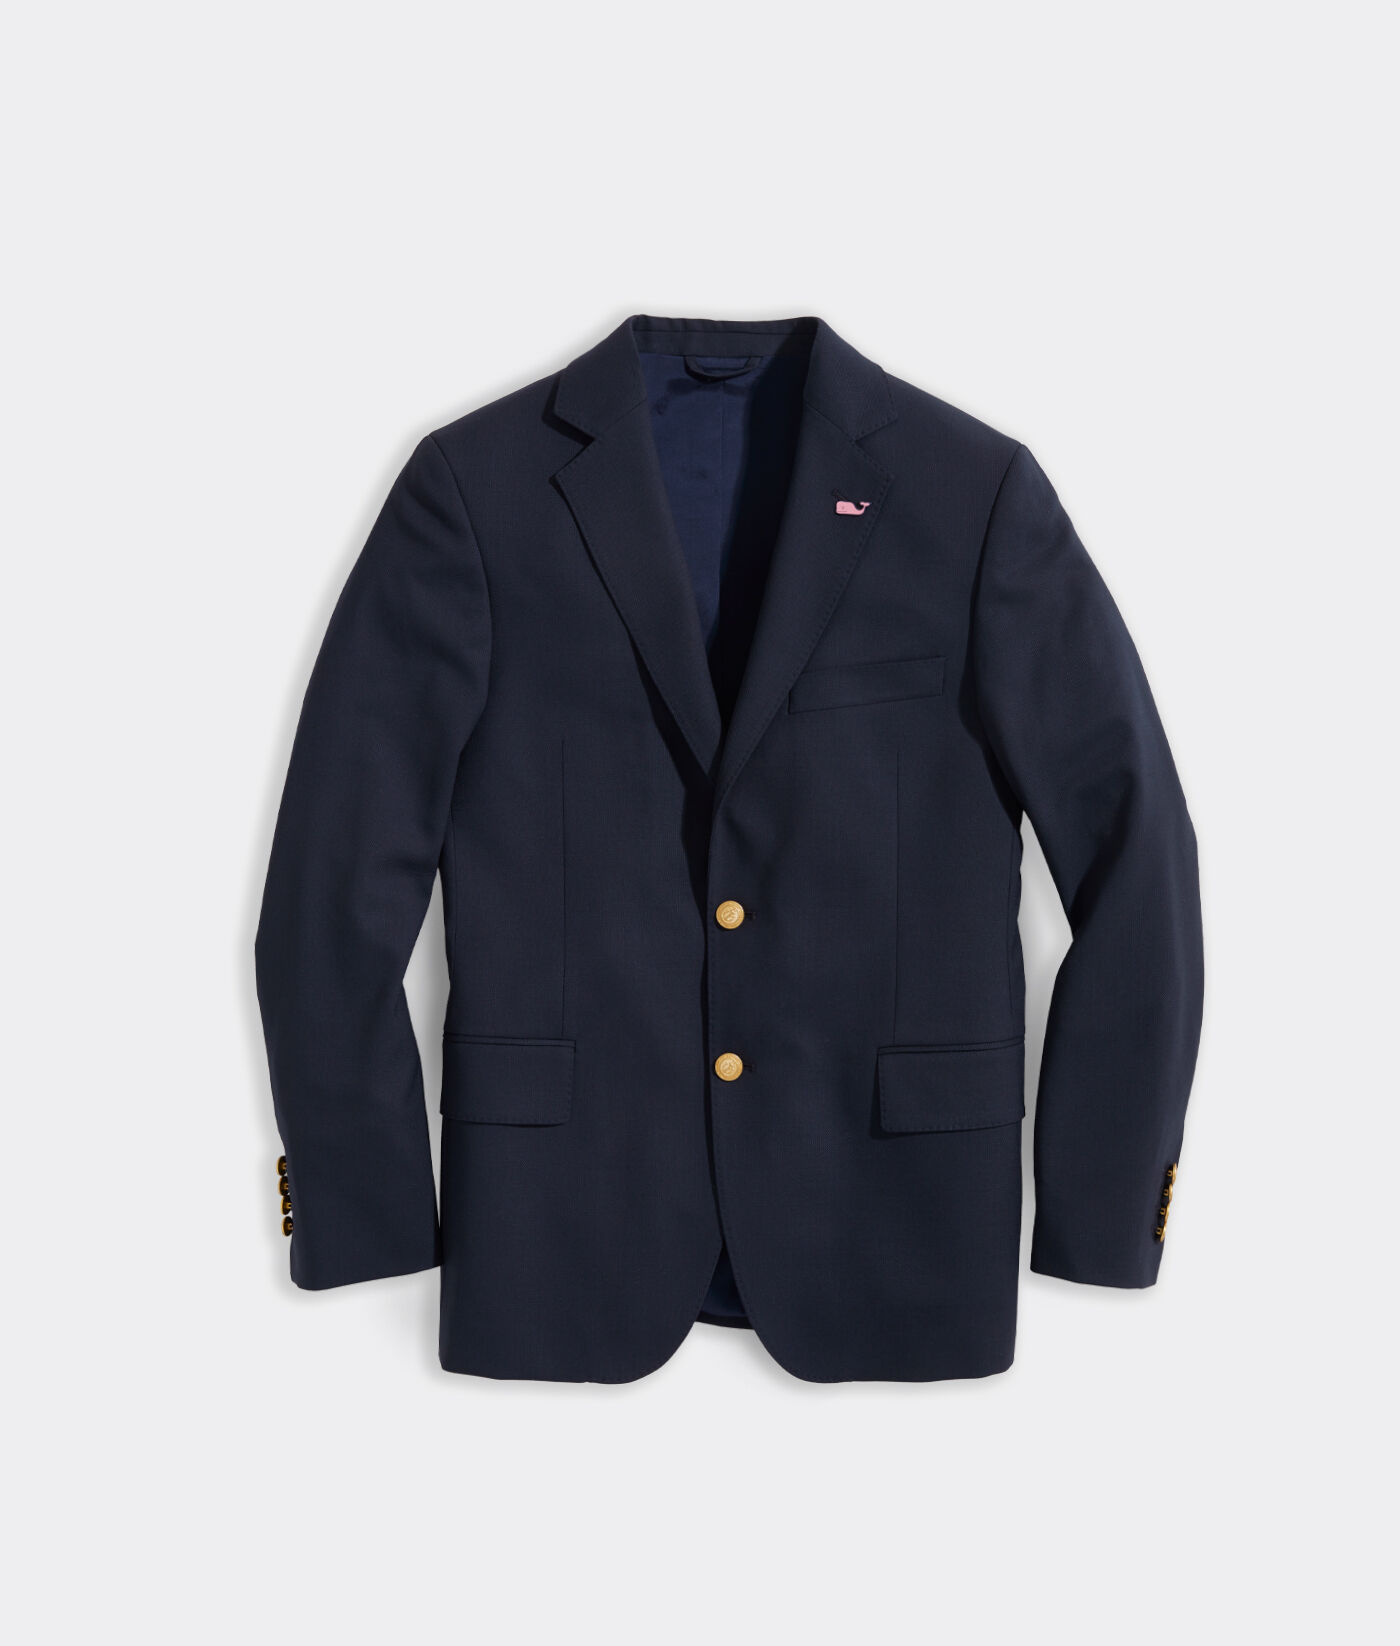 KASPER BLAZER/LINED/RETAIL$129/SIZE 10/NEW WITH TAG/TANK NOT INCLUDED/NAVY  – St. John's Institute (Hua Ming)